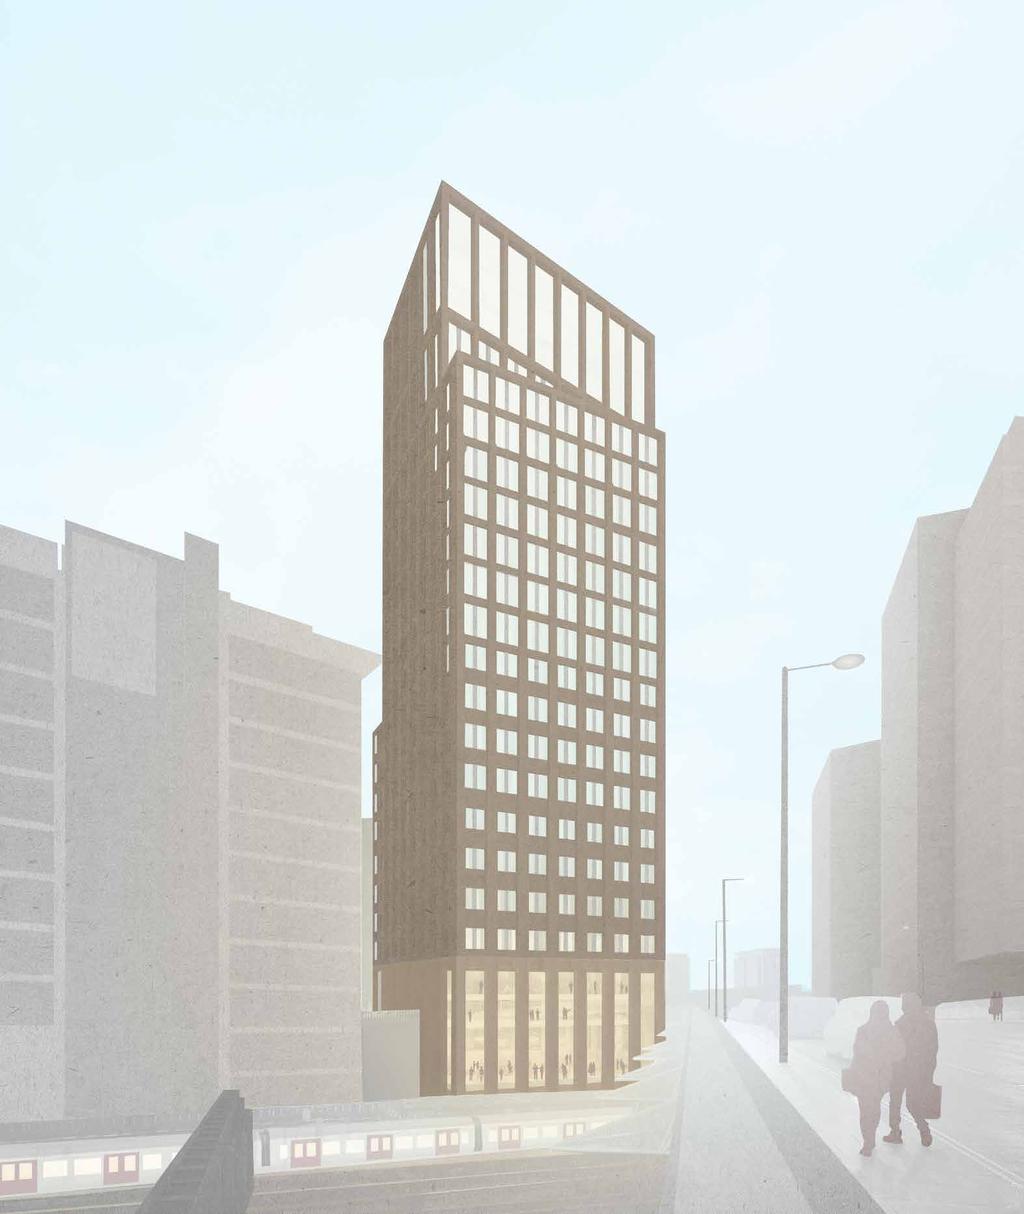 A NEW DESTINATION At this stage, to deliver the required number of rooms, restaurant and leisure offer, our proposals are for a slender building of Ground plus 19 storeys.